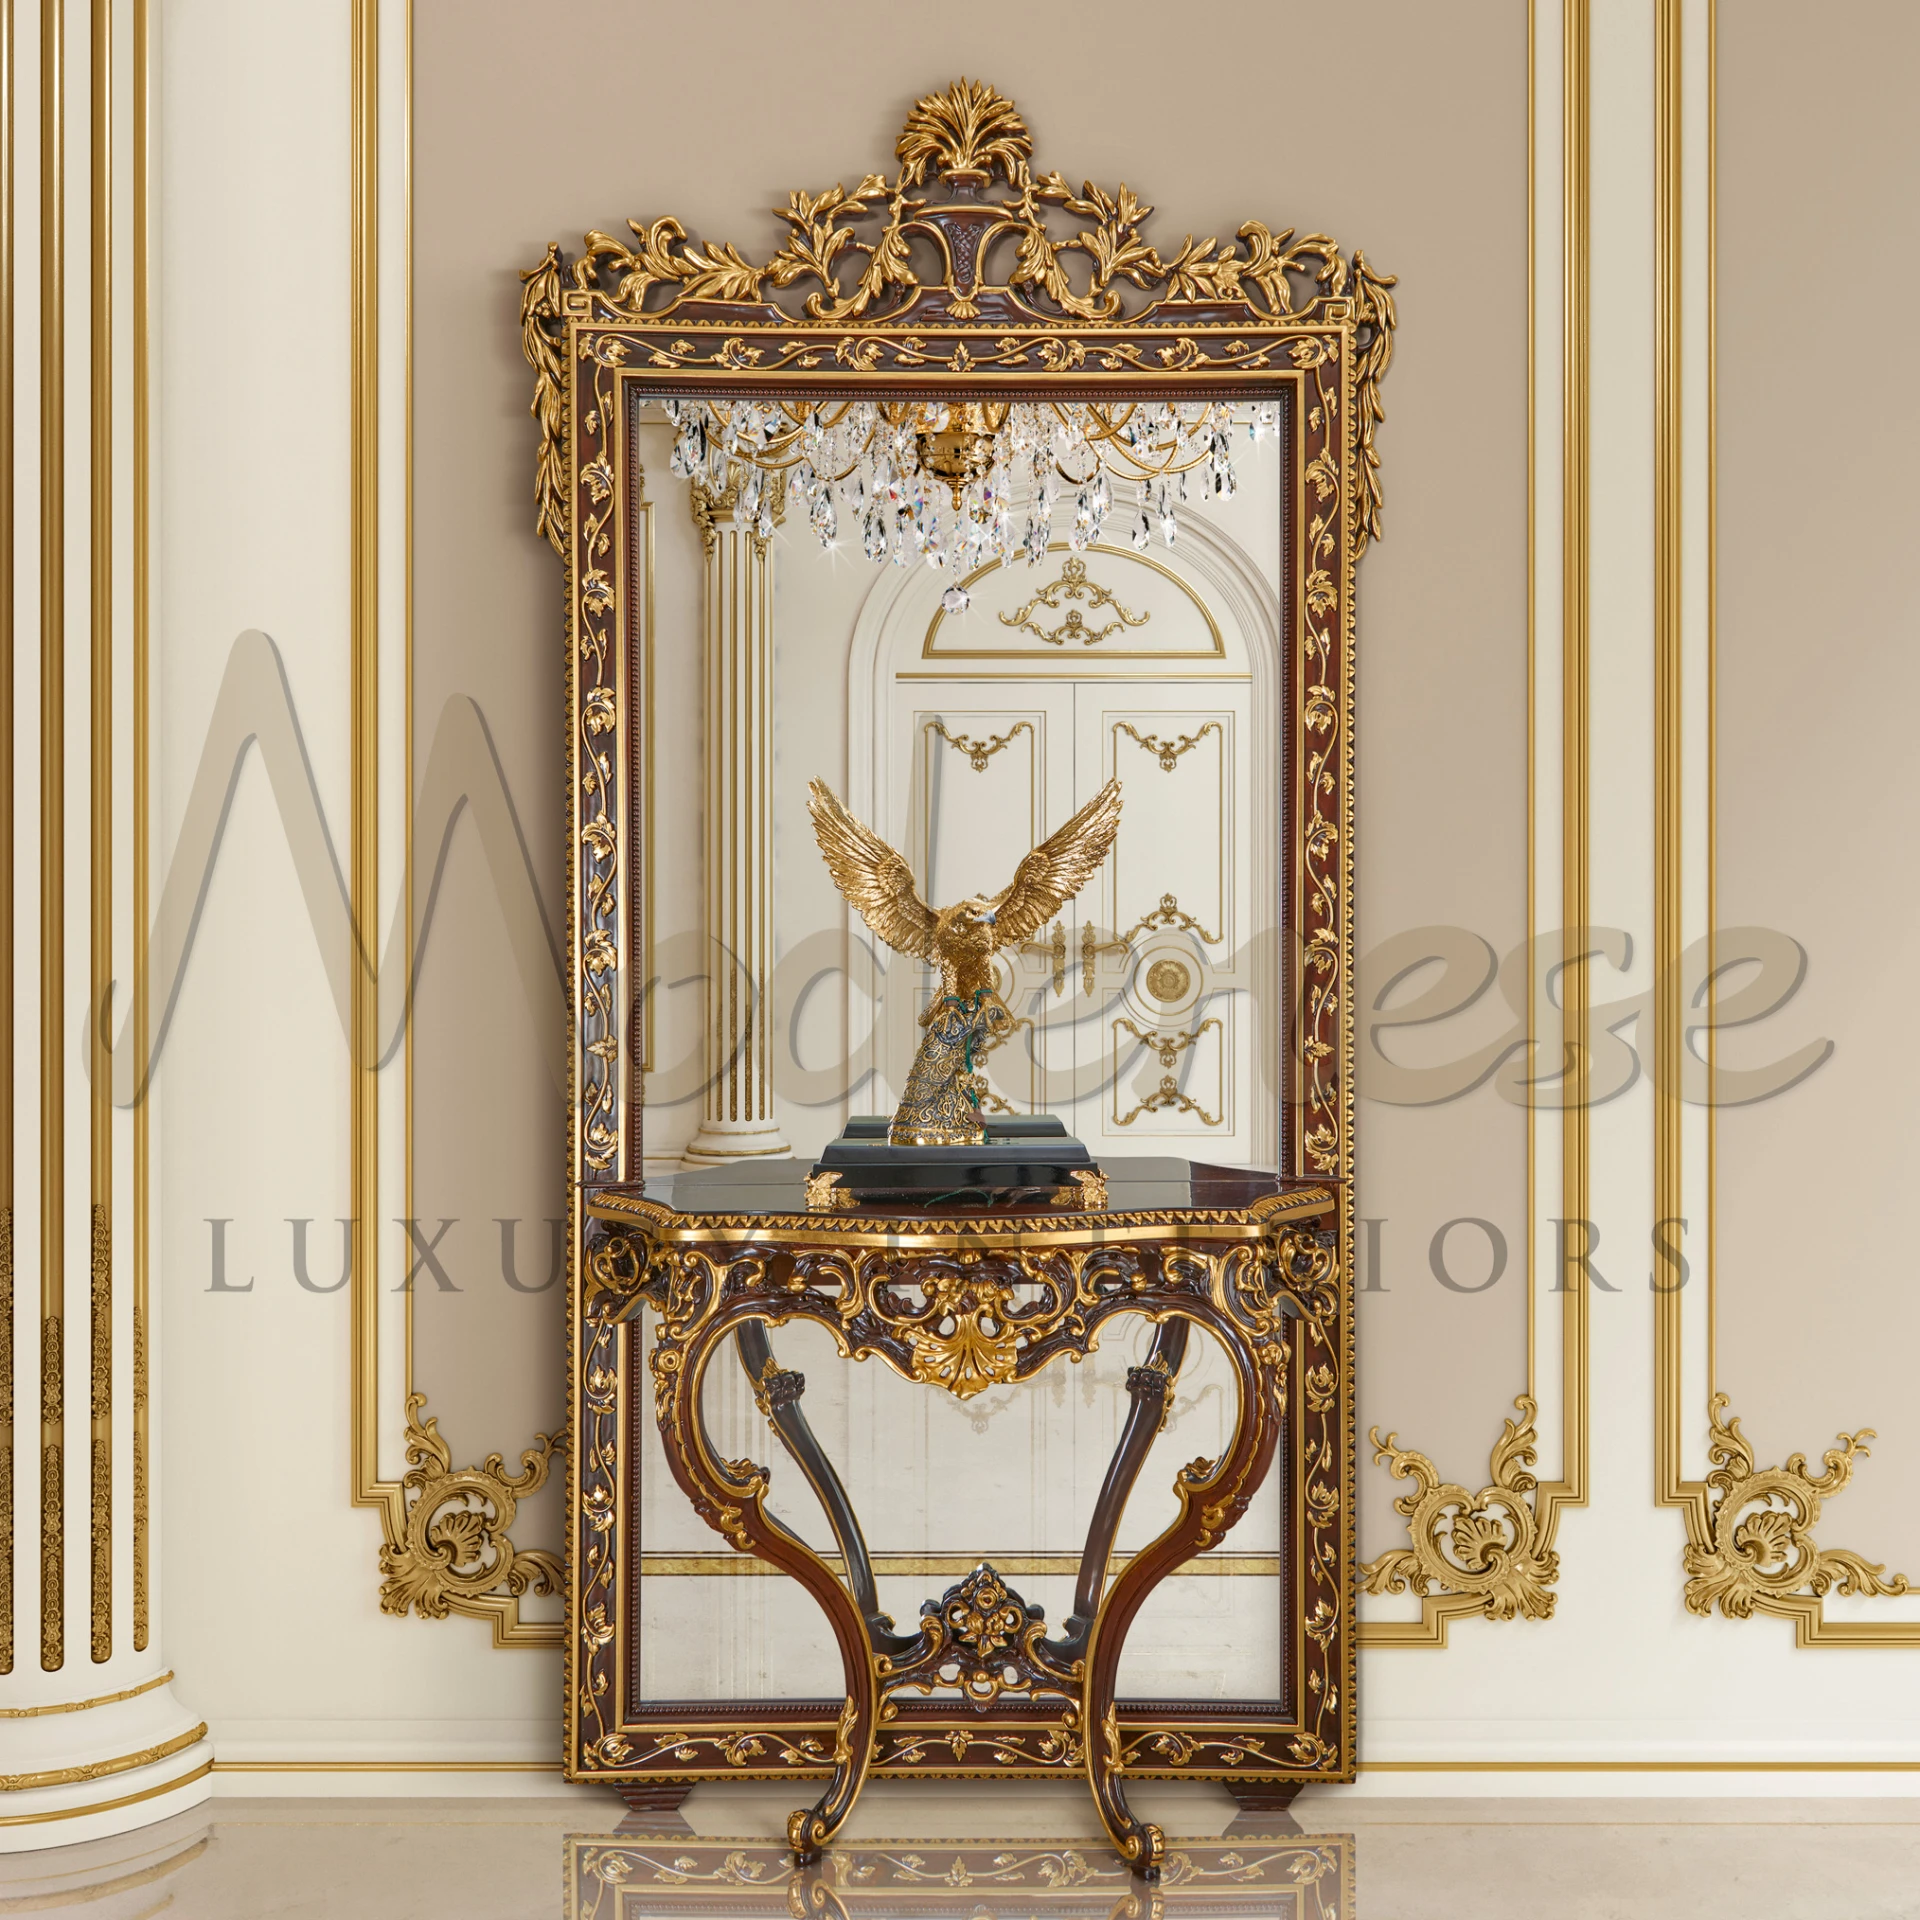 Italian-designed Empire Console, adorned with gold leaf details, showcasing the elegance of luxury console tables.